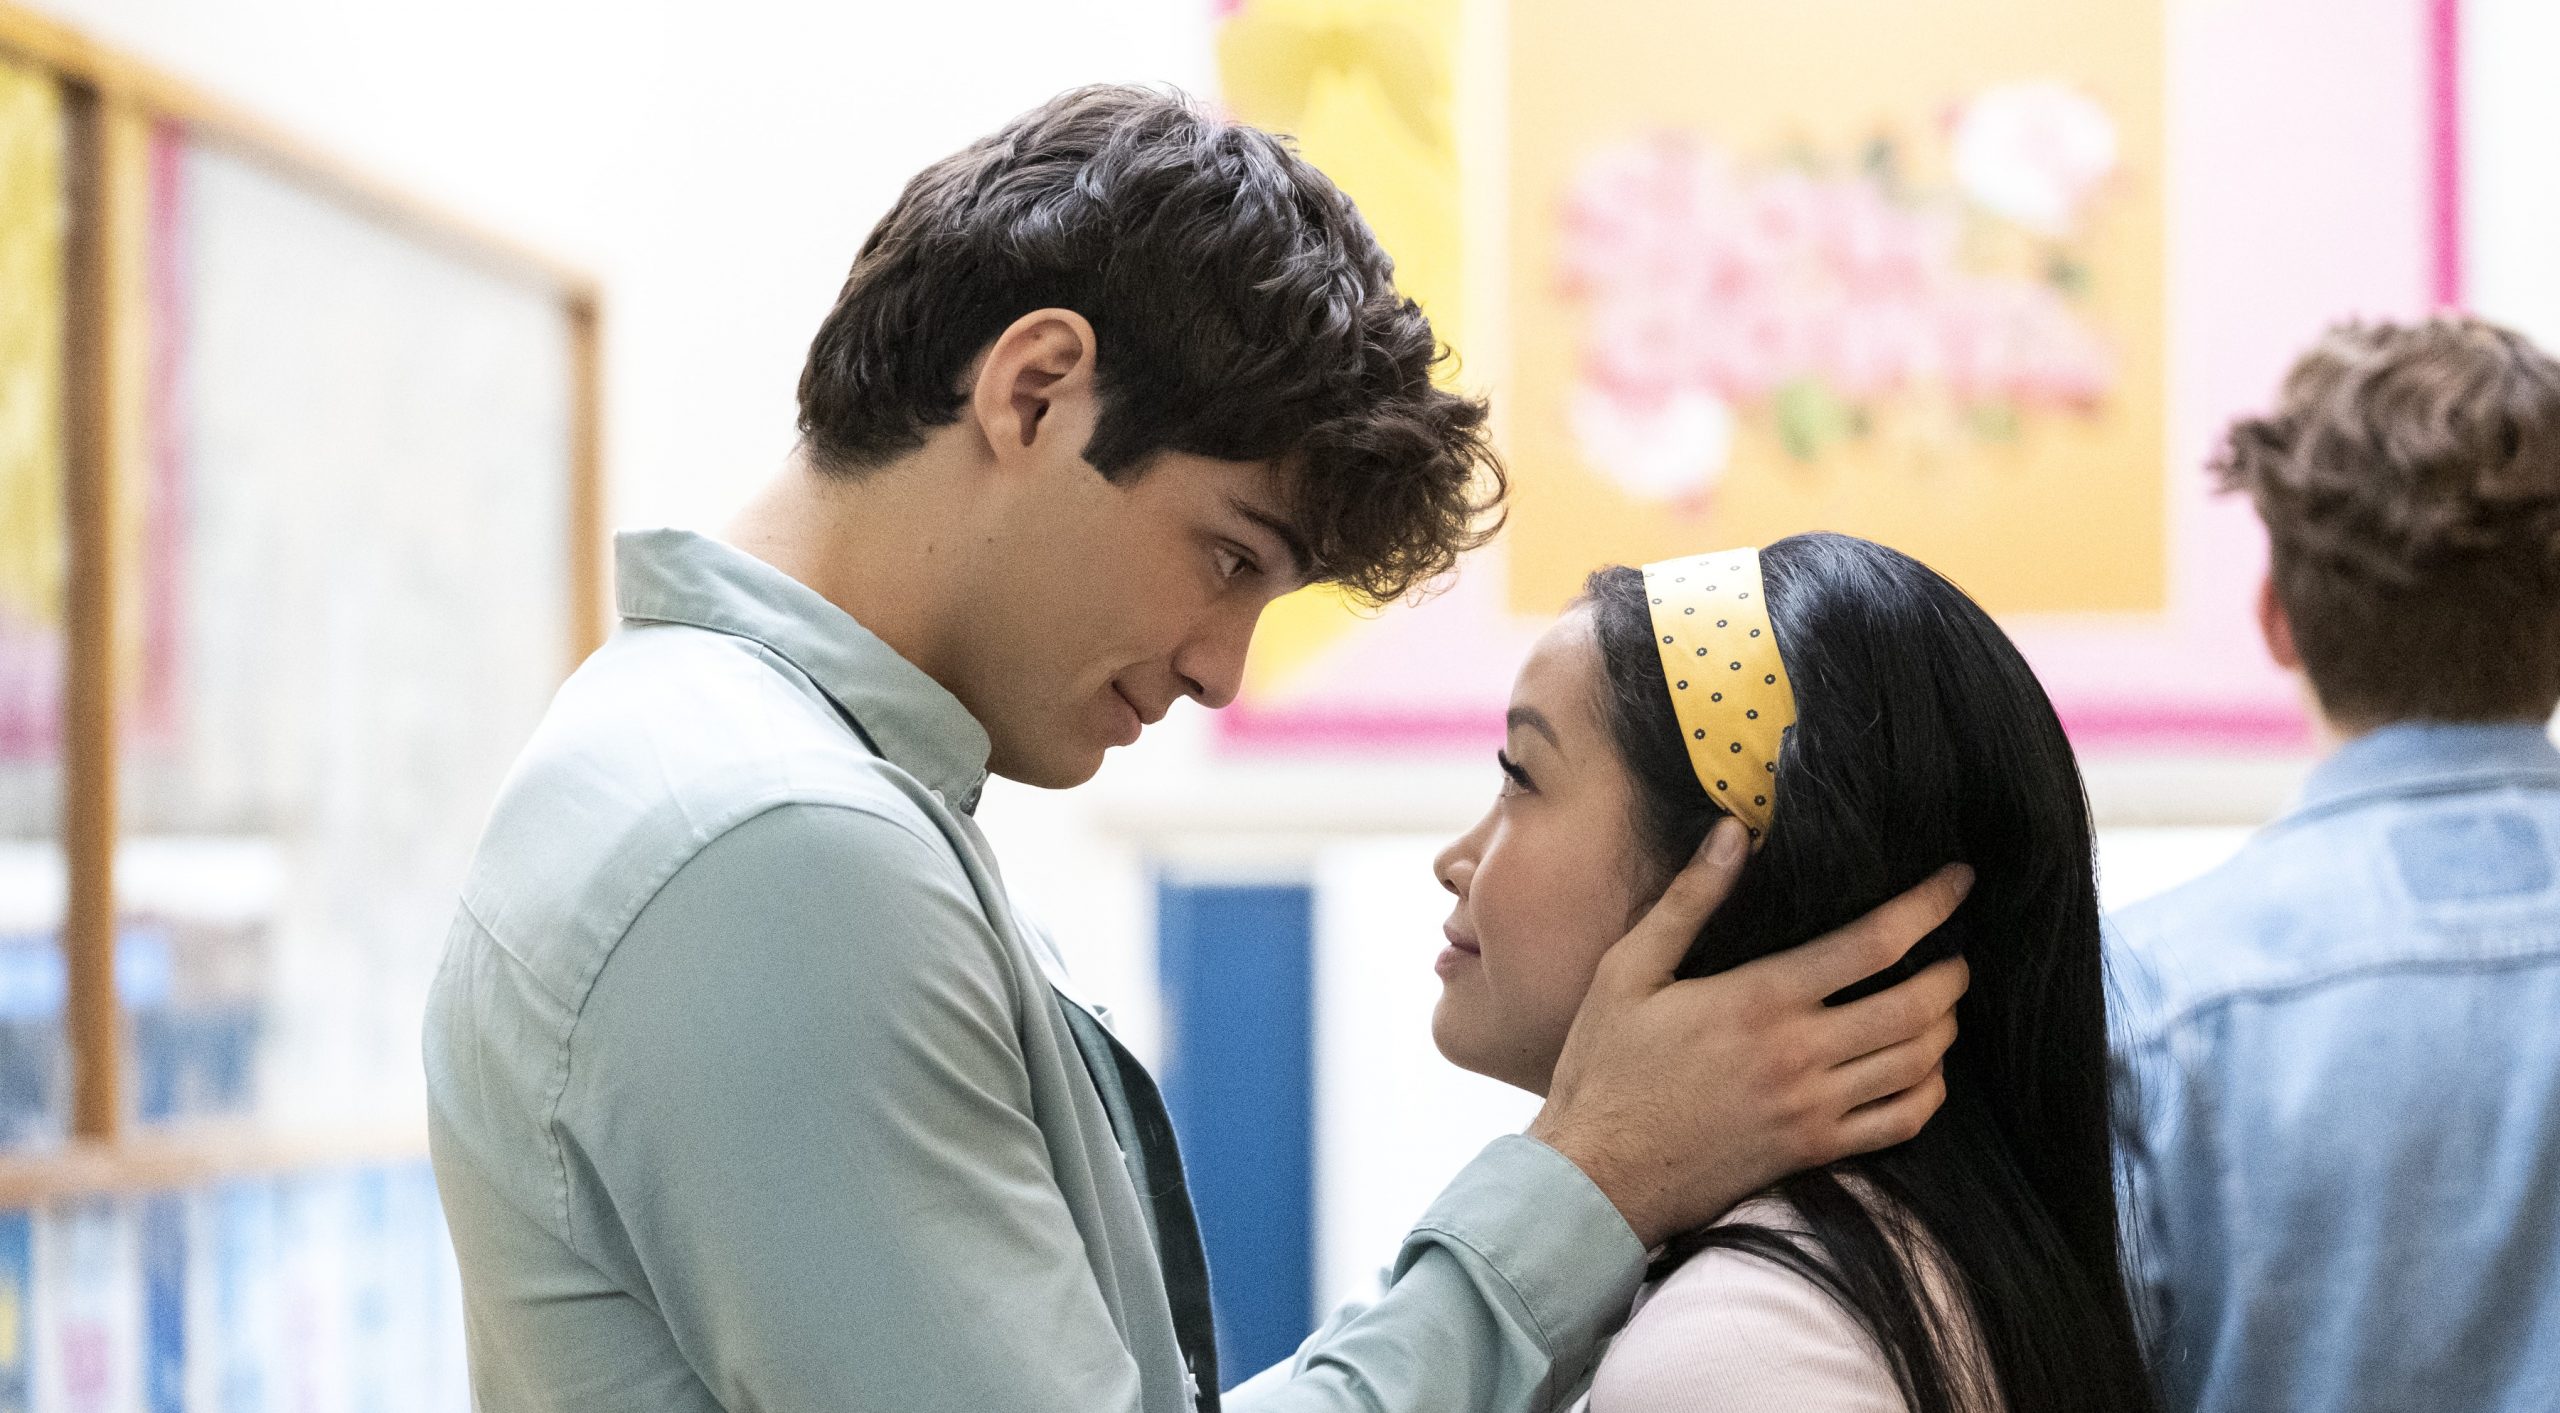 To all the Boys I've Loved Before PS I Still Love You Netflix